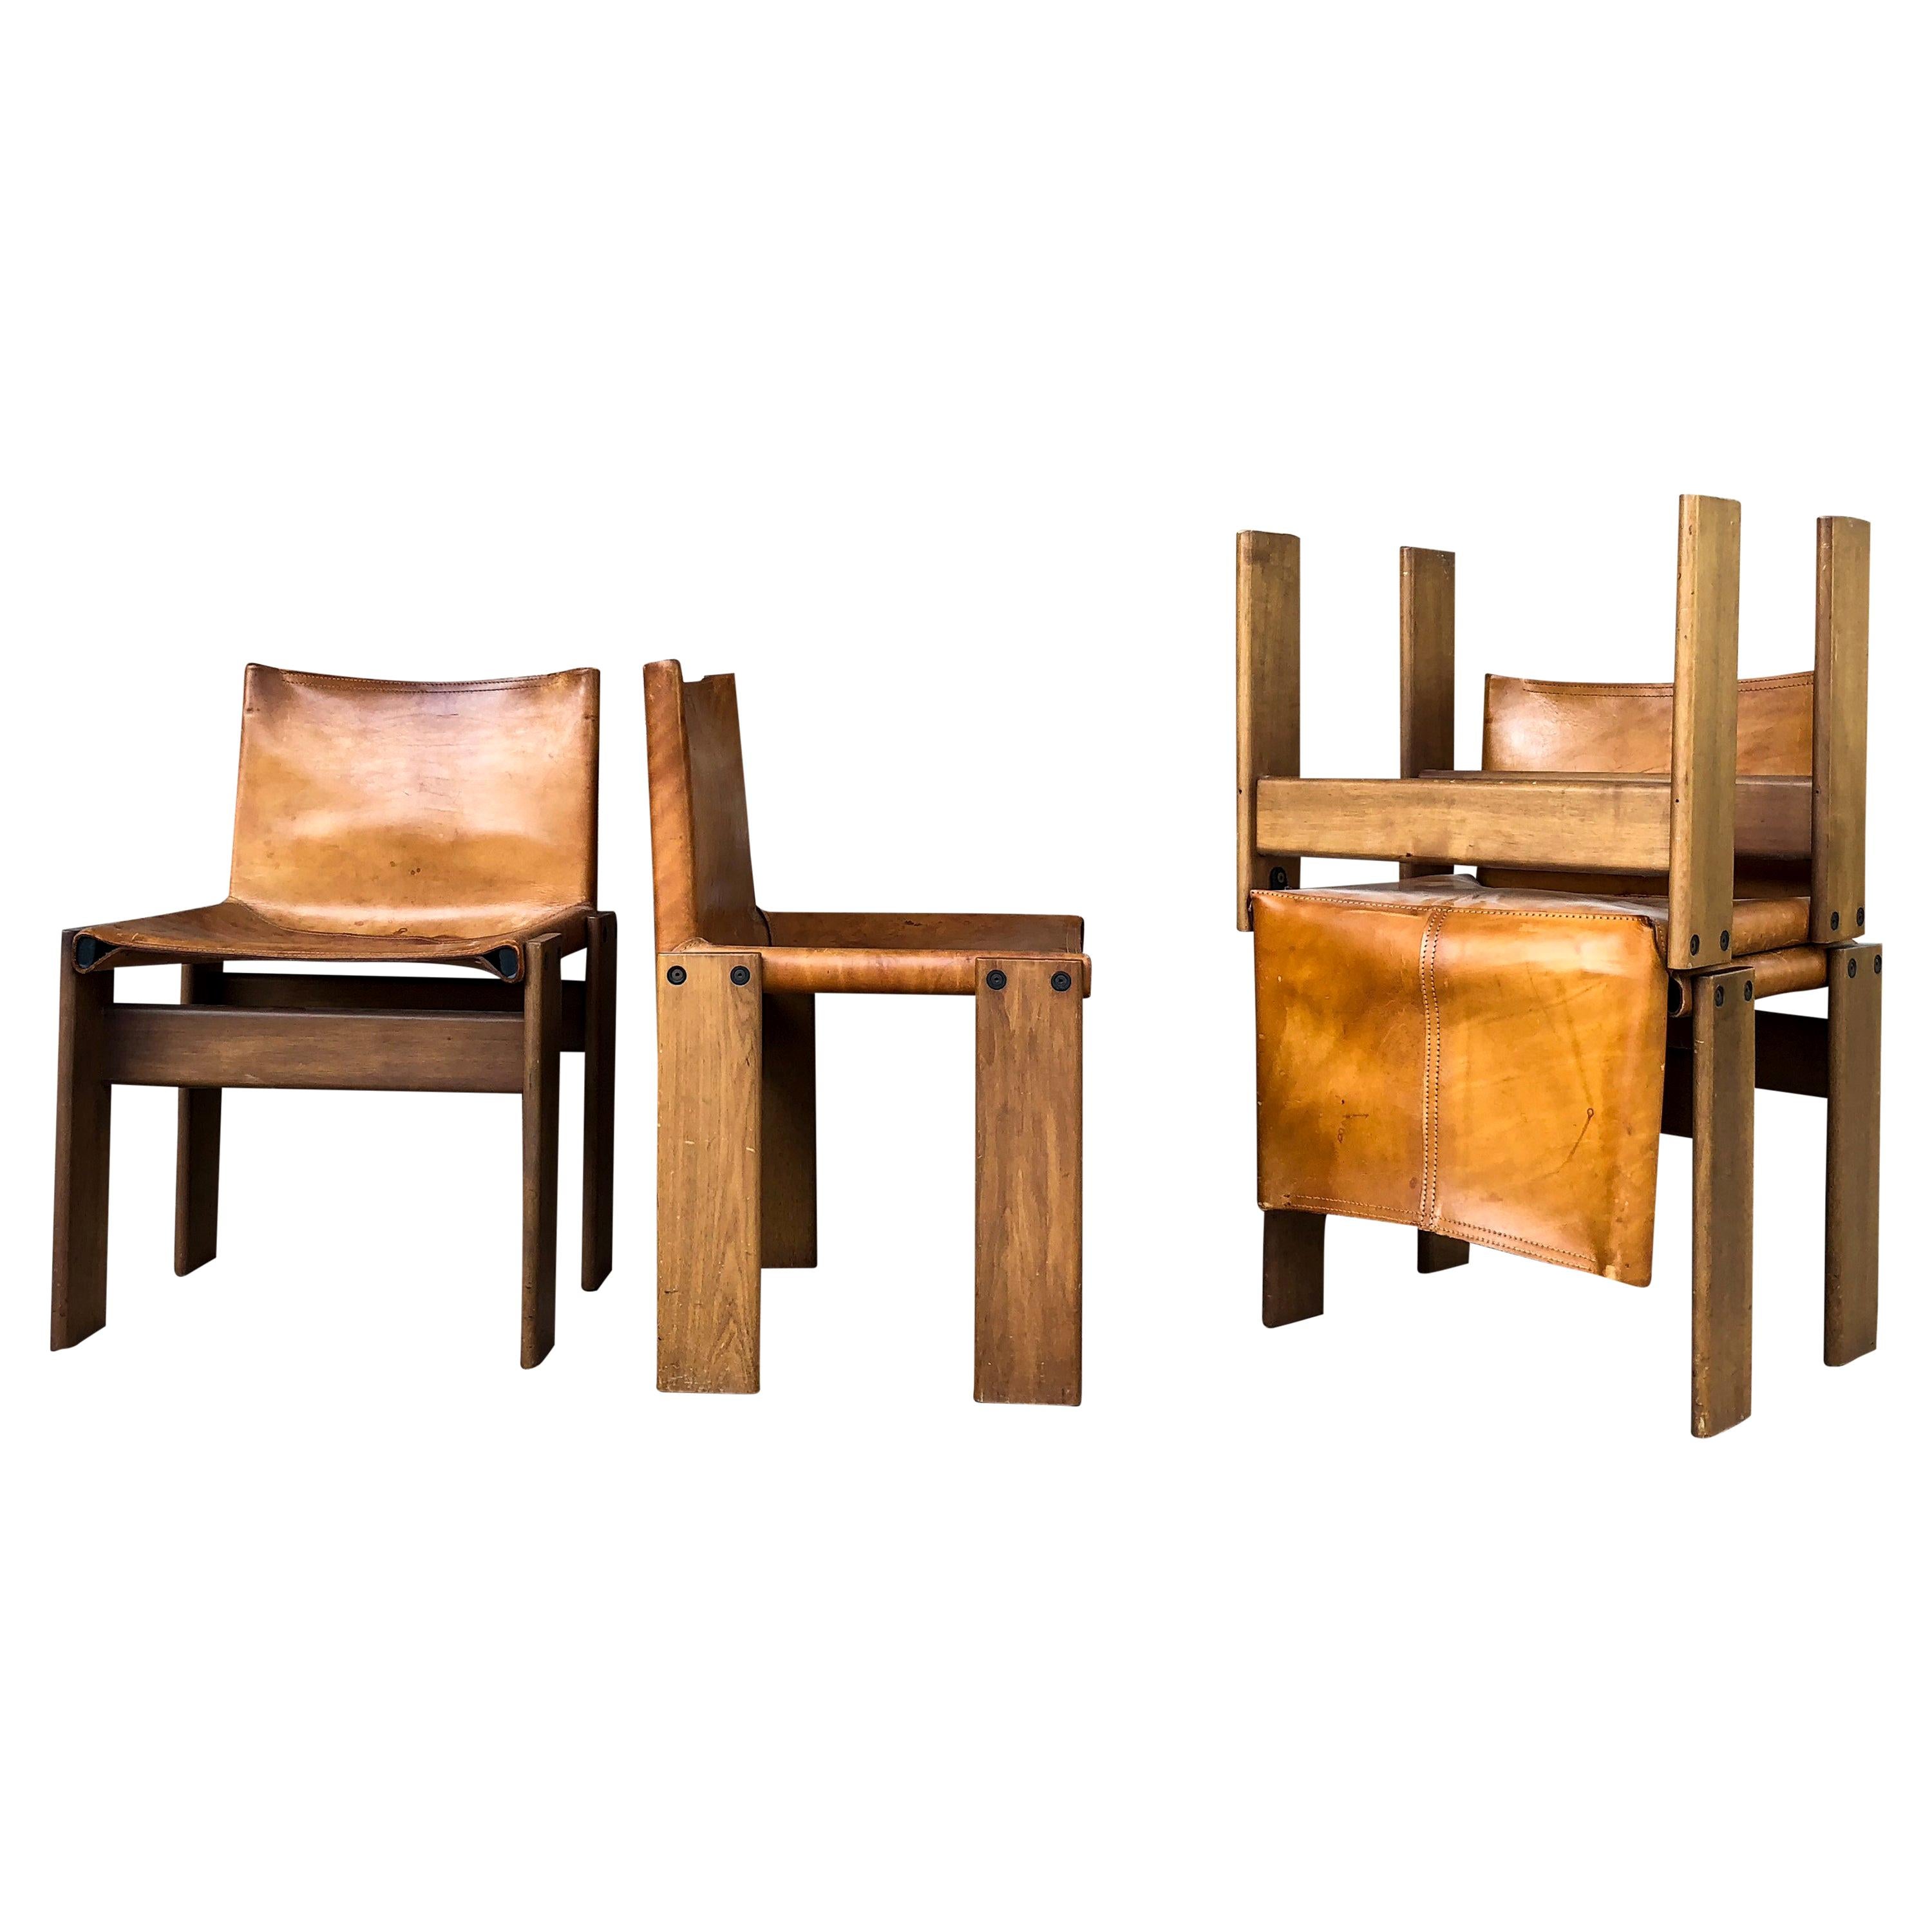 Afra & Tobia Scarpa Midcentury "Monk" Dining Chair for Molteni, 1973, Set of 4 For Sale